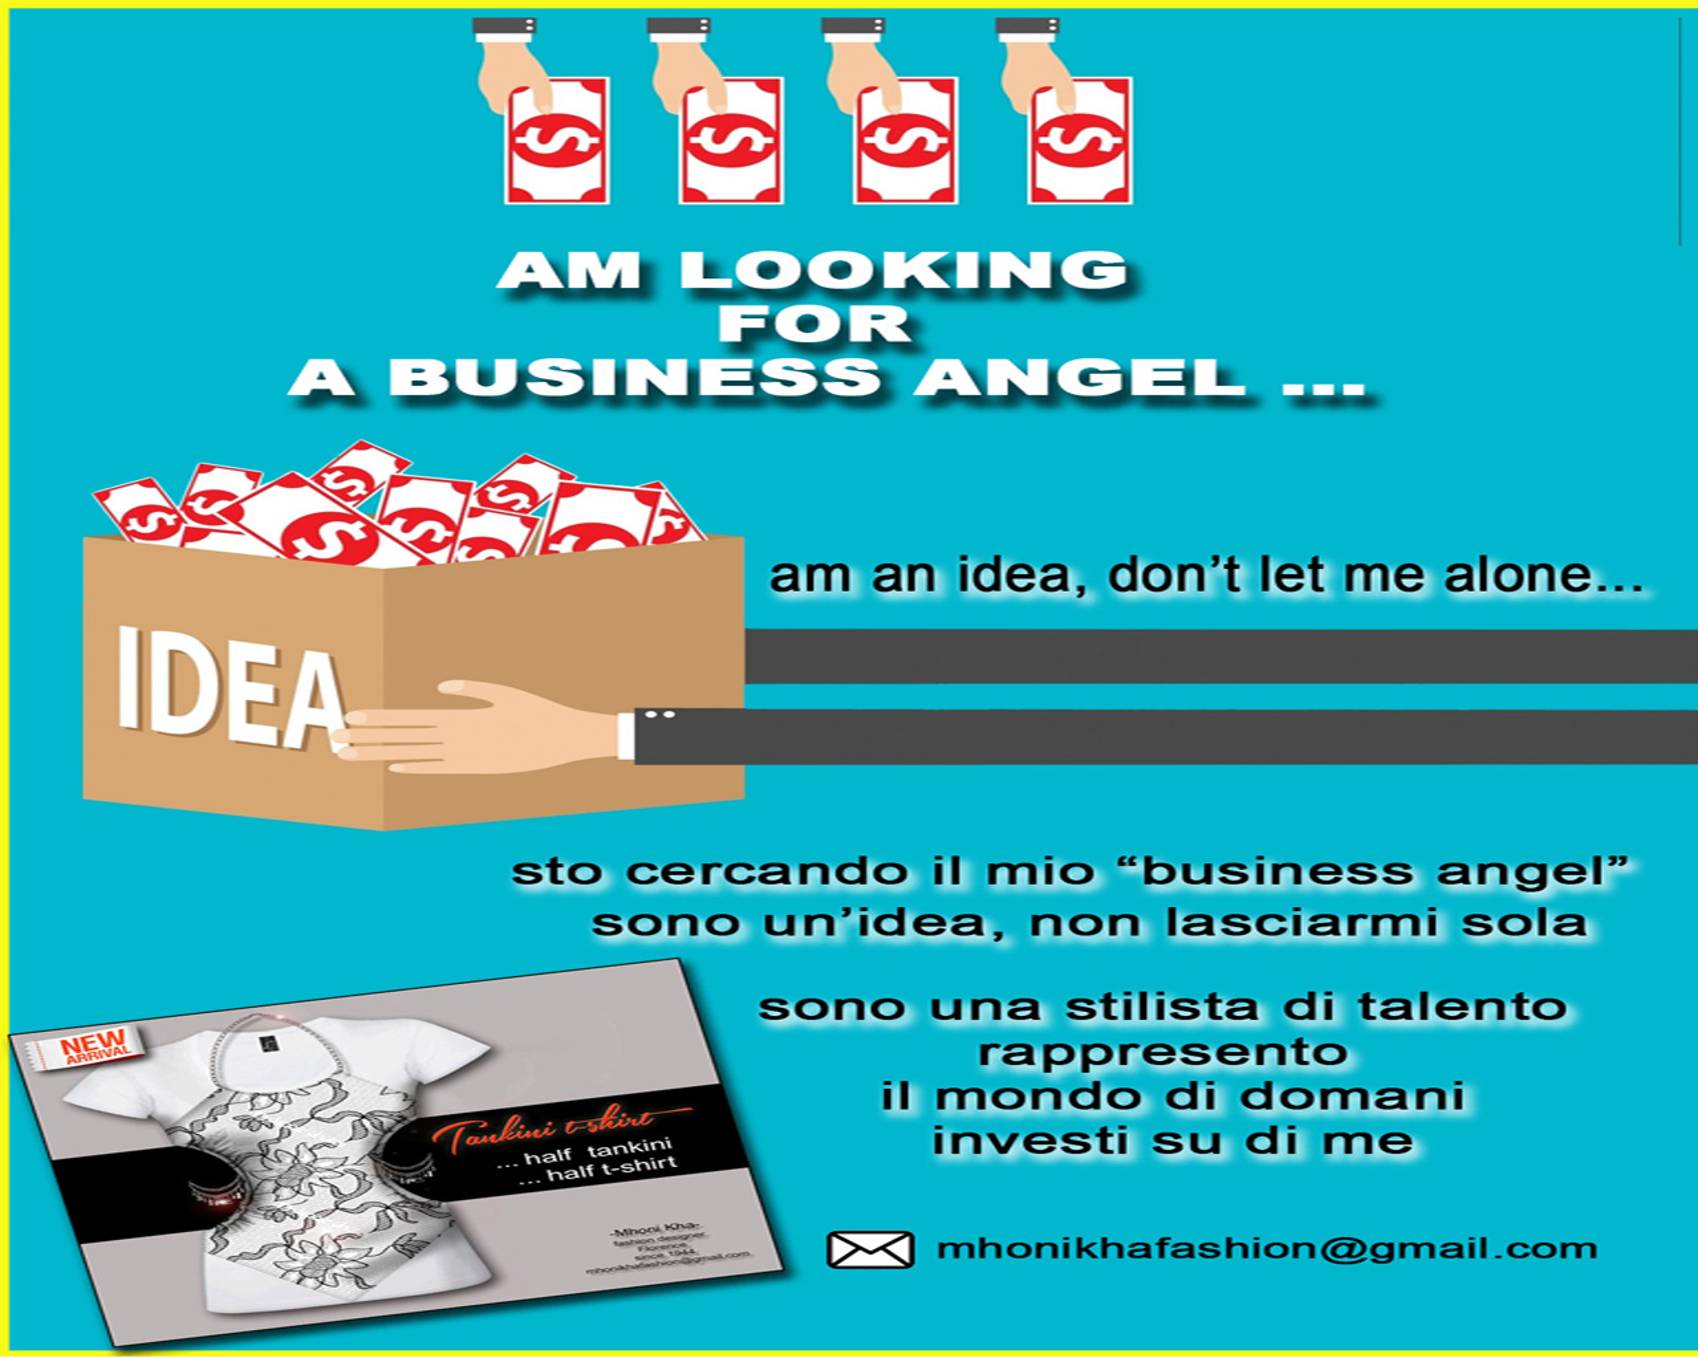 LOOKING FOR A BUSINESS ANGEL...